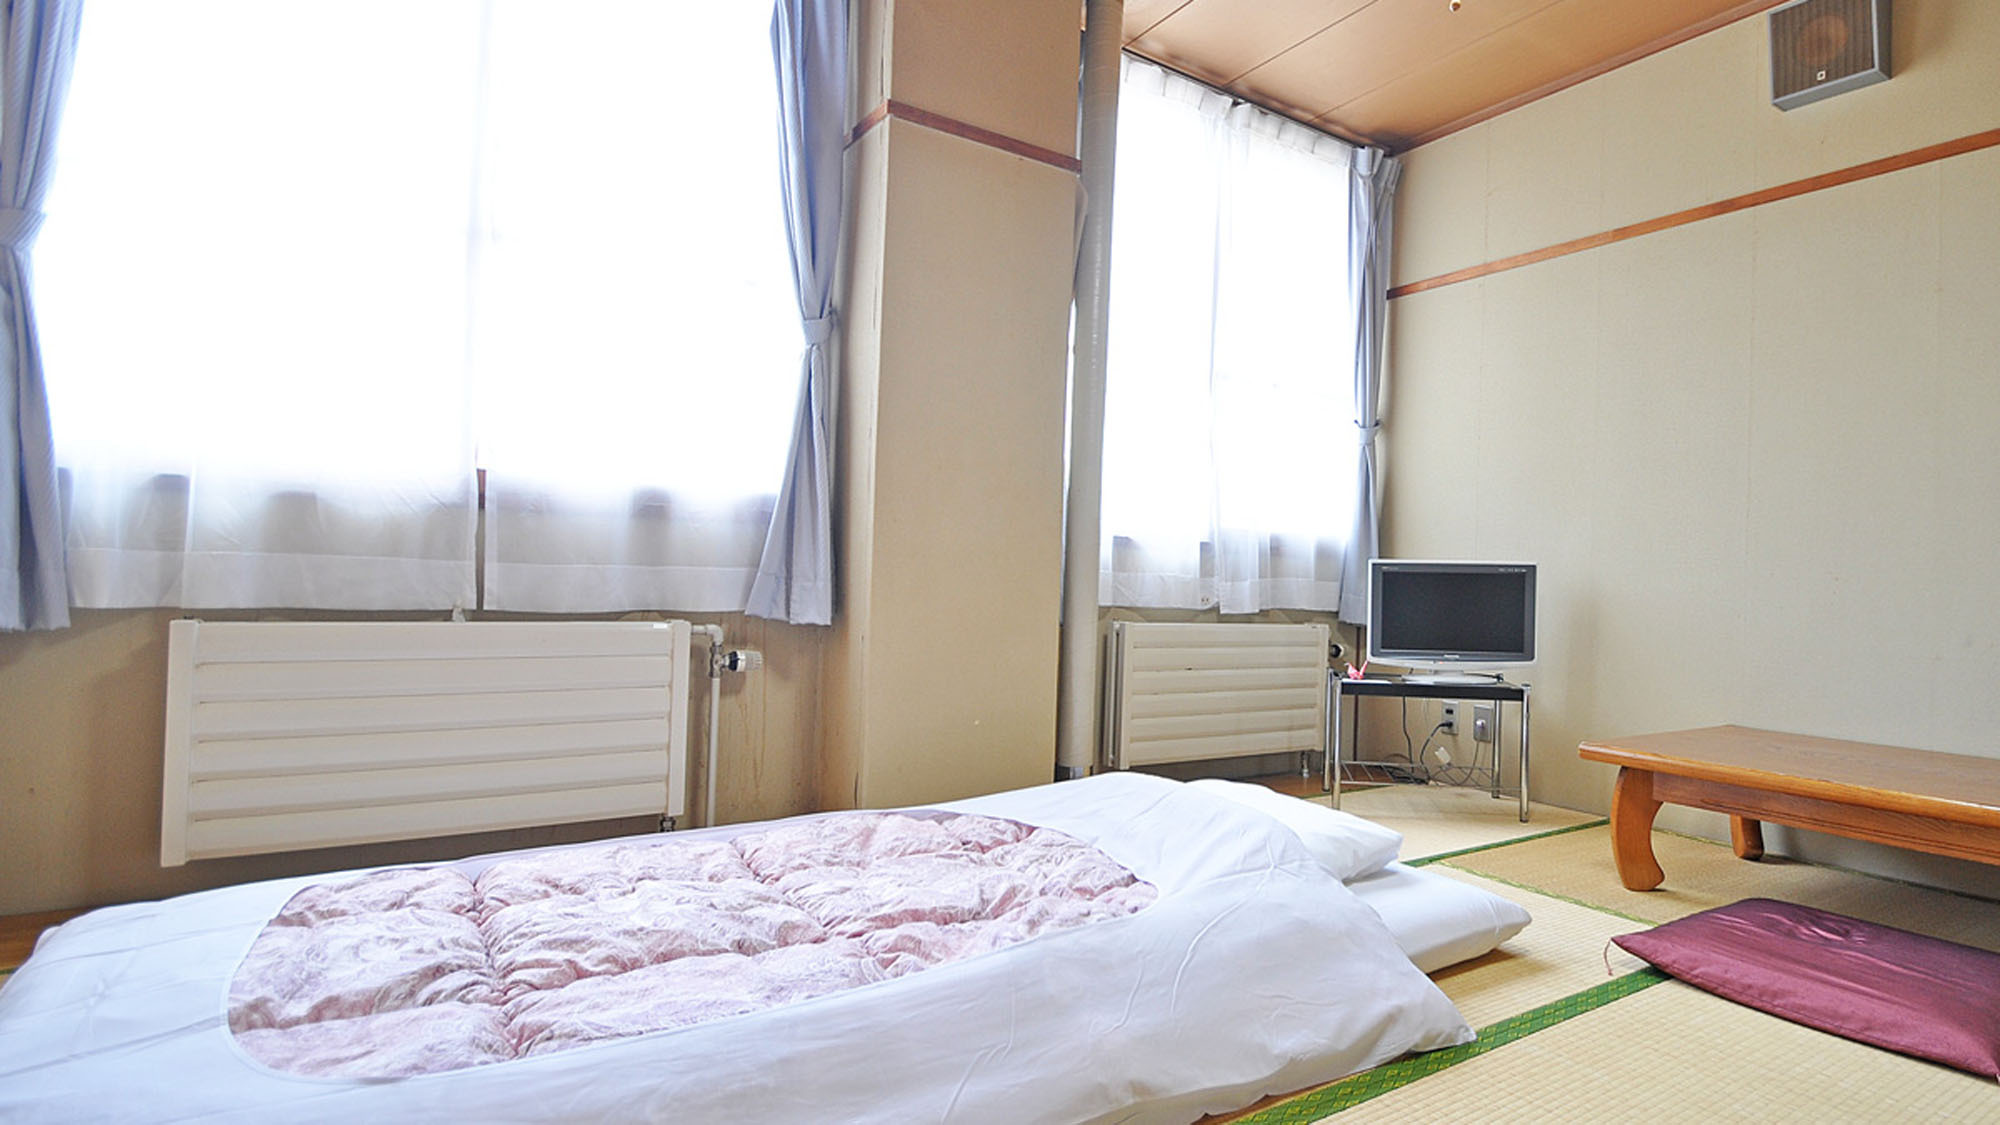 Utanobori Green Park Hotel Utanobori Green Park Hotel is conveniently located in the popular Esashi area. The property has everything you need for a comfortable stay. Laundromat, restaurant, vending machine, shops, fax or photo